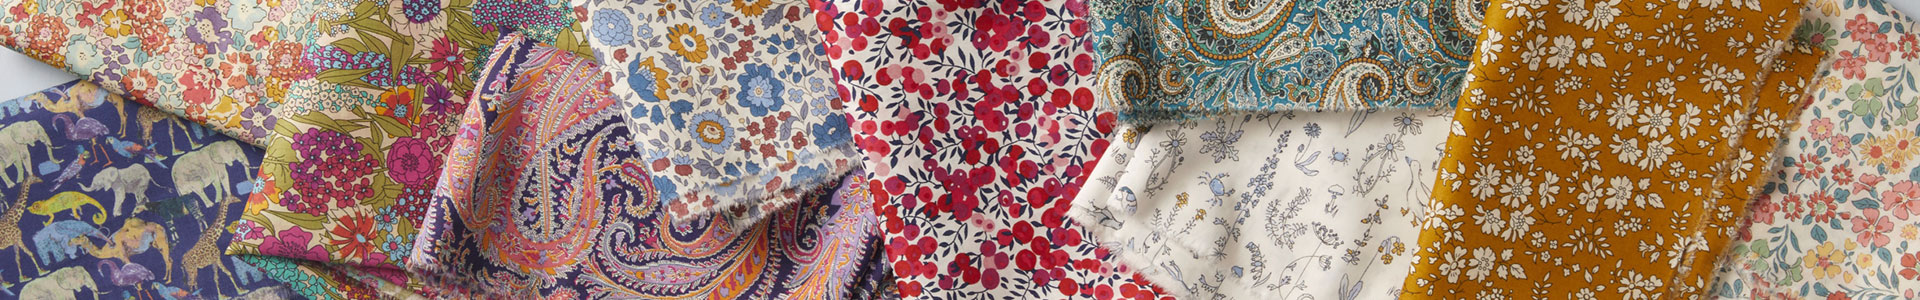 Check out our new collection of Liberty London Fabrics!